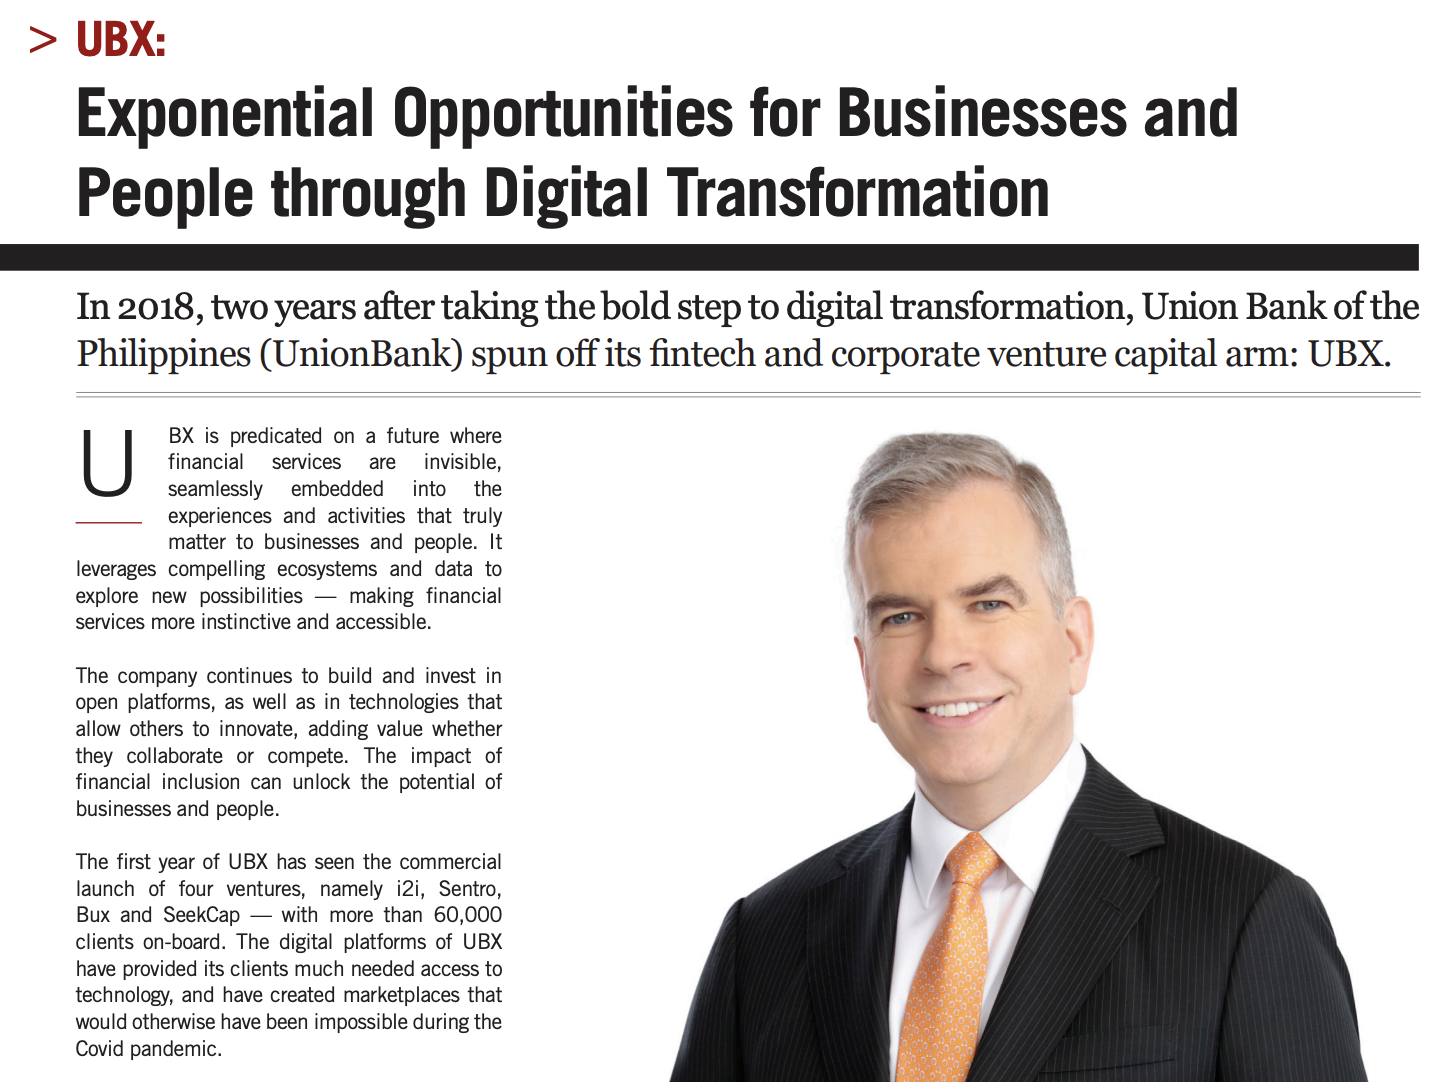 Exponential Opportunities for Businesses and People through Digital Transformation | UBX Philippines News